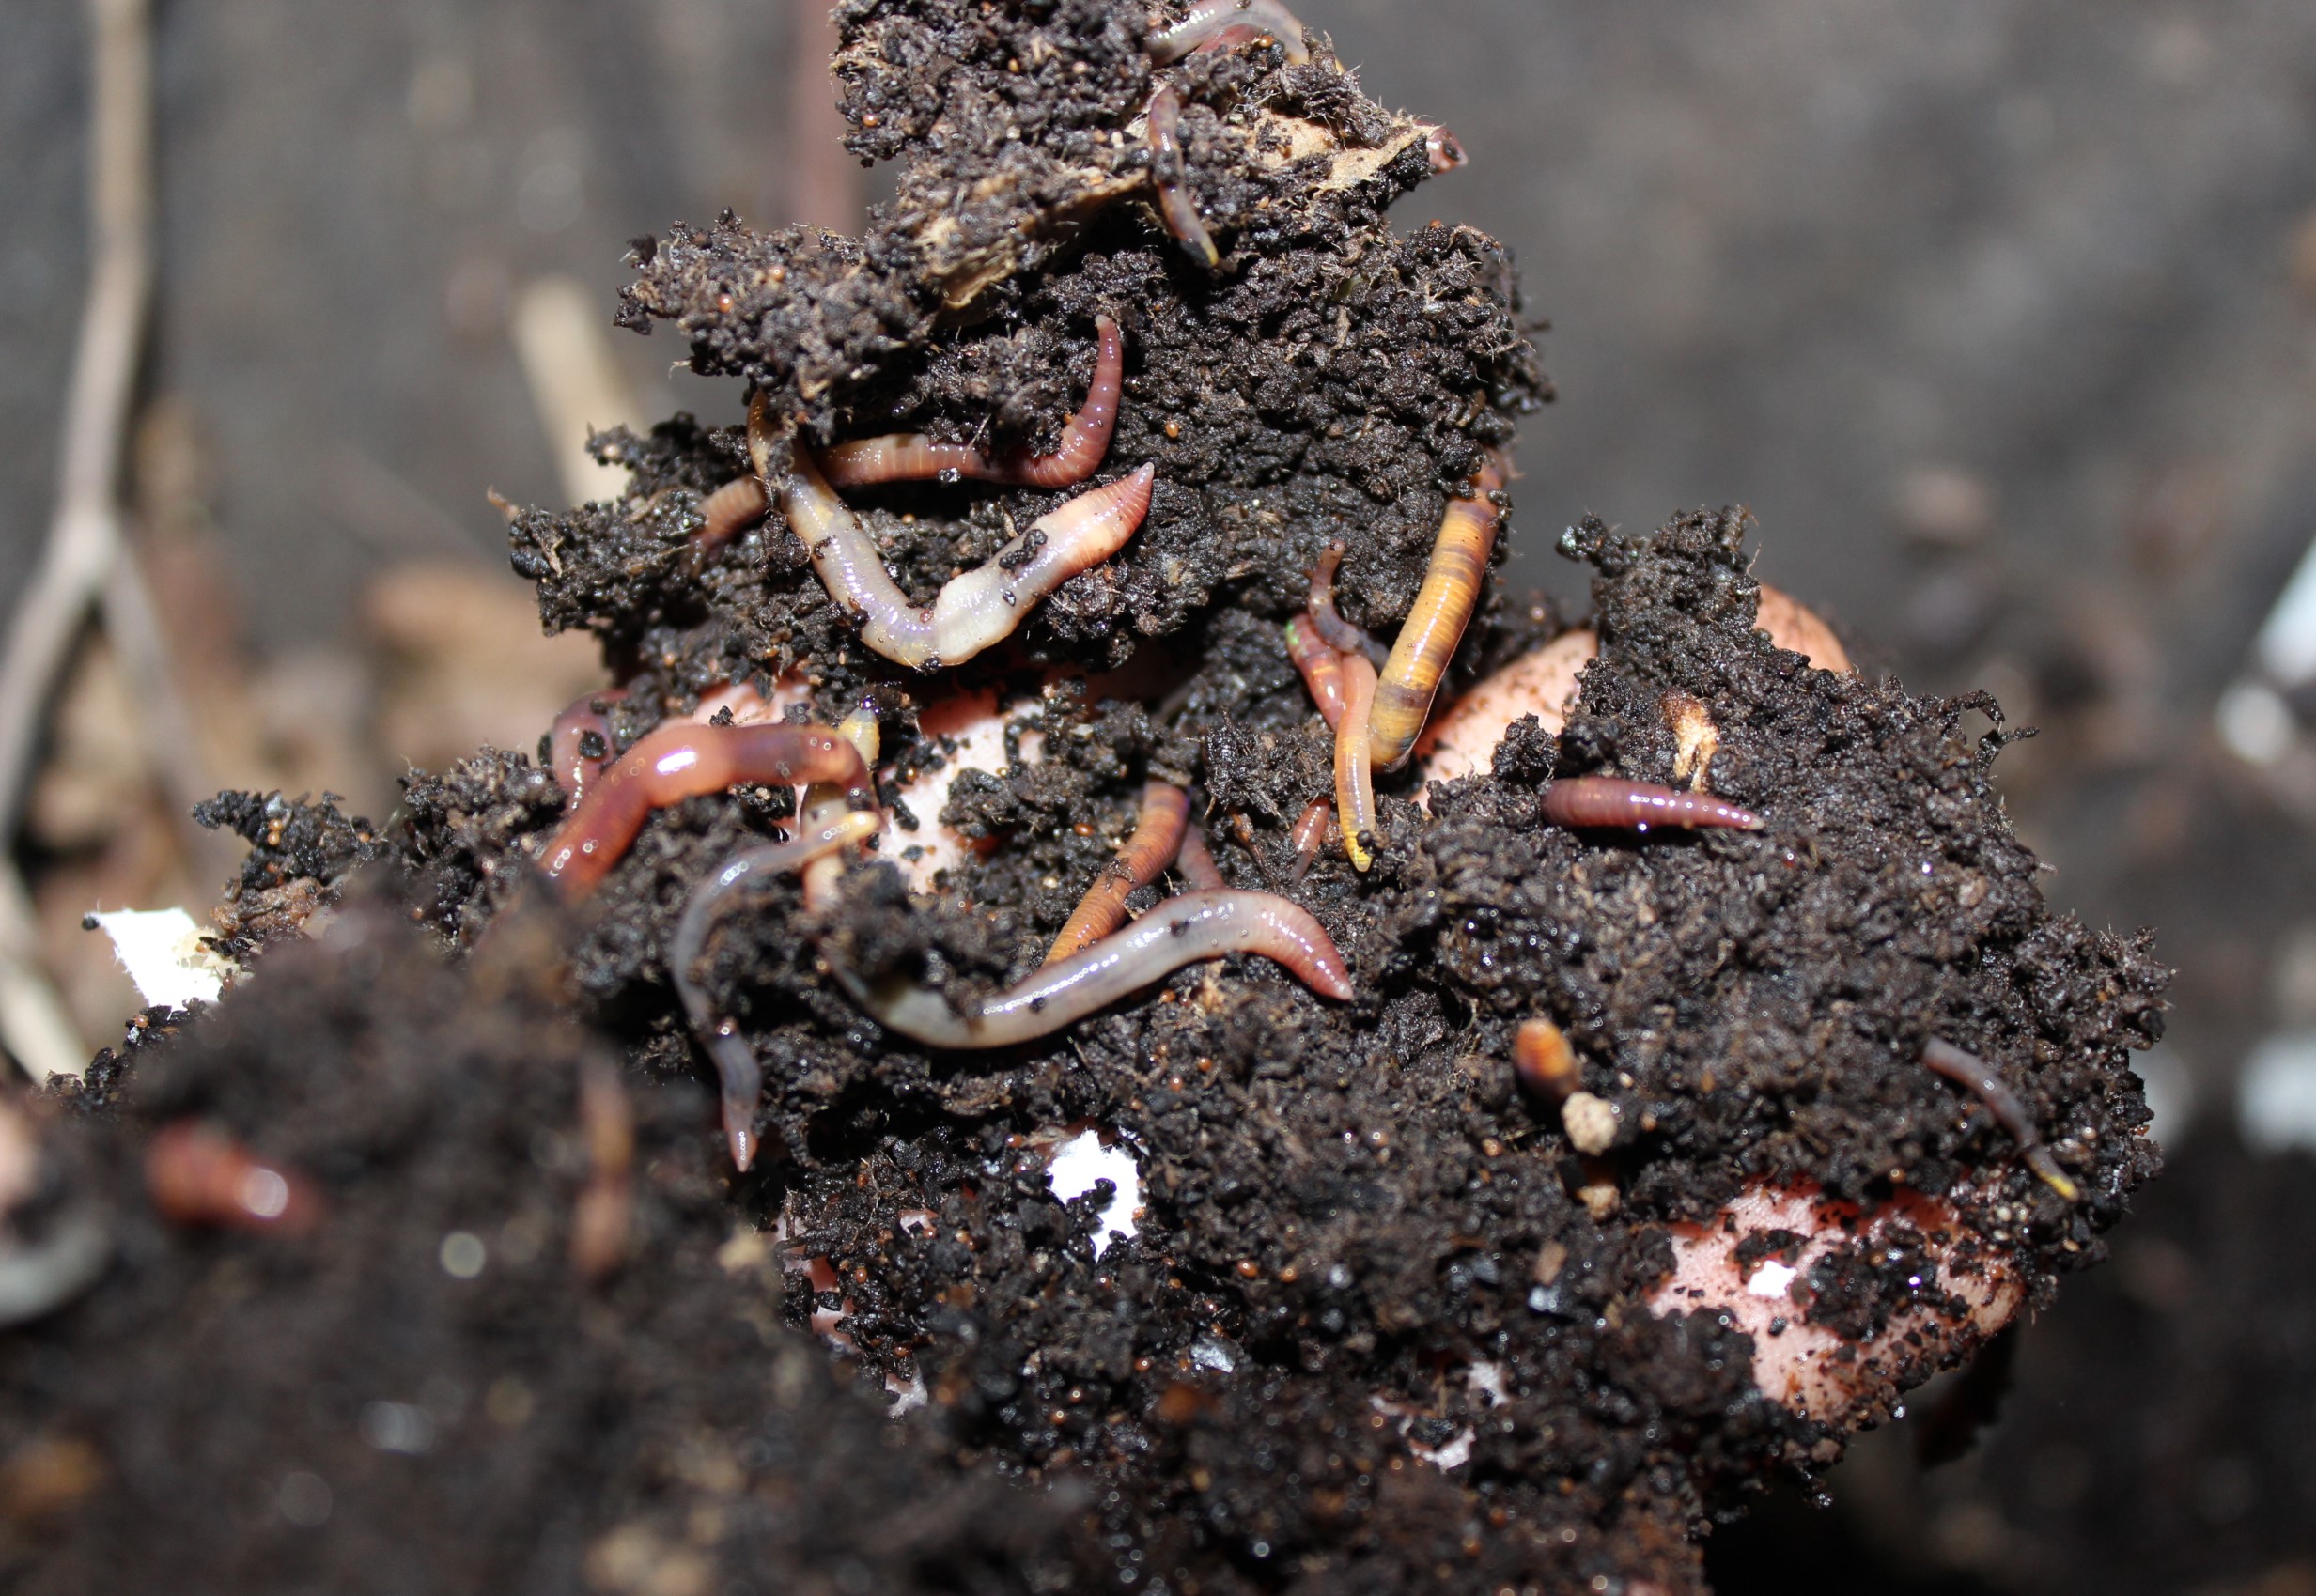 Worms in fresh compost held by hands